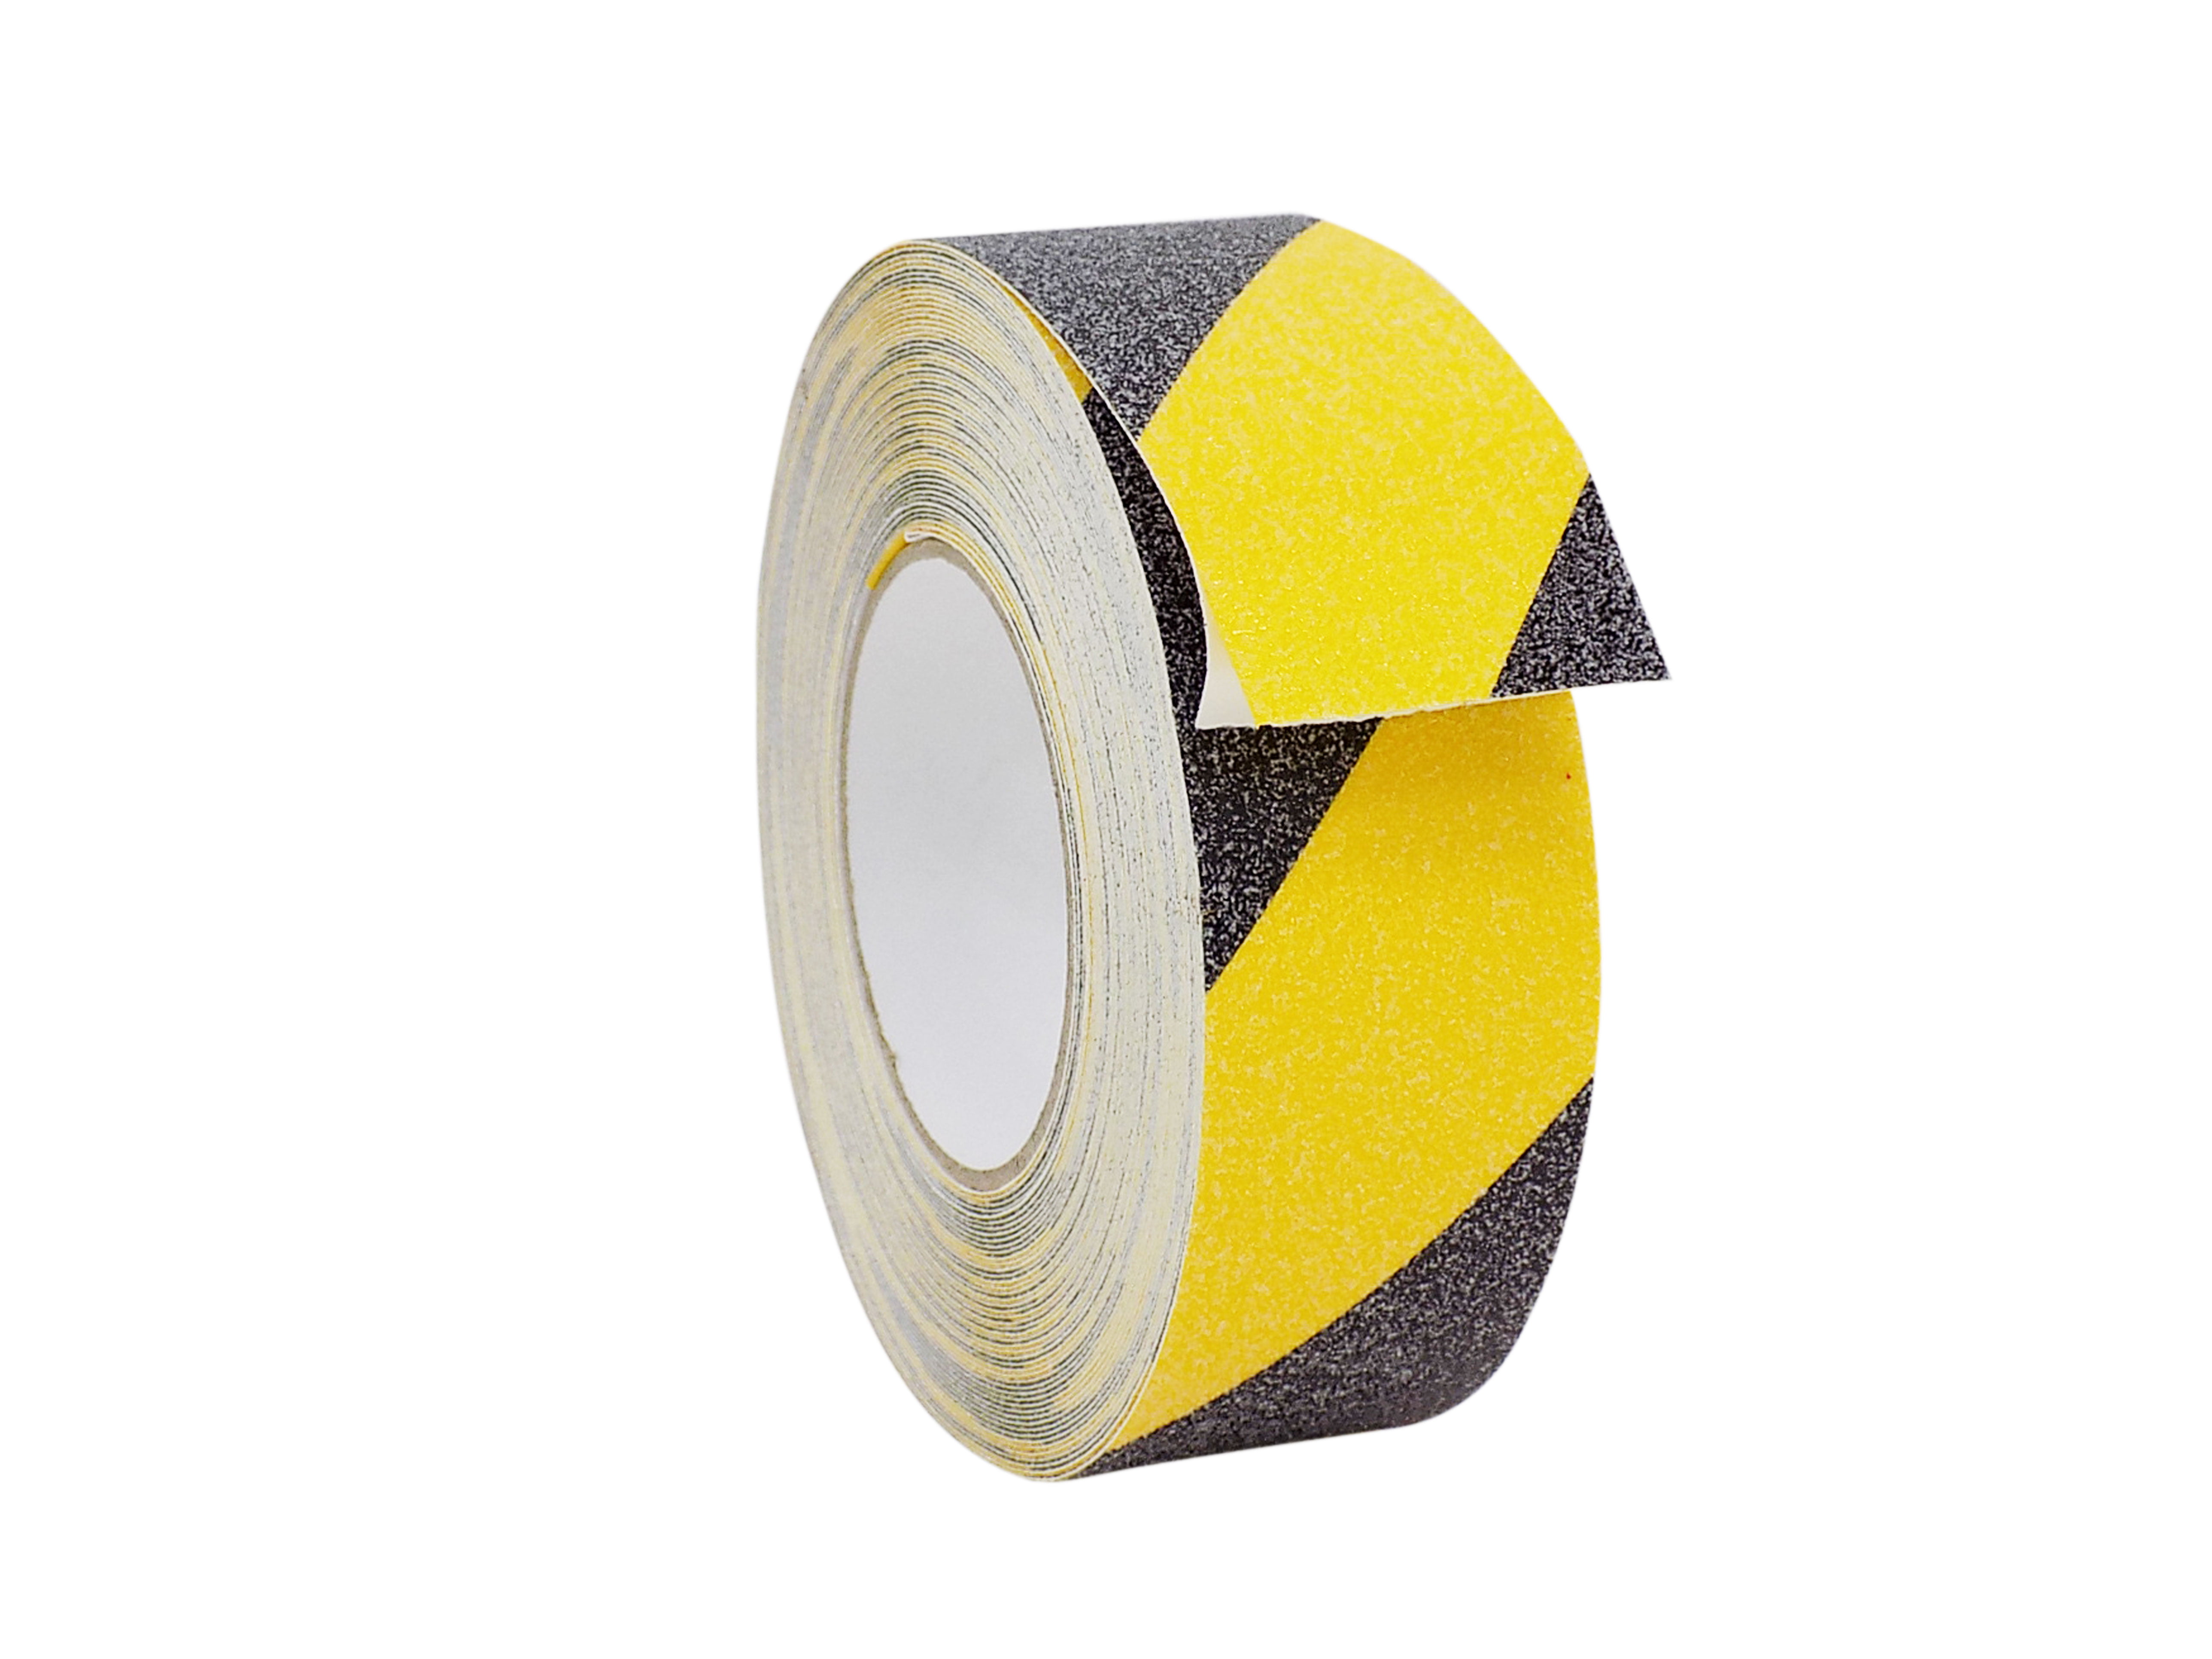 20 30 Anti Slip Traction Tape Black Yellow Roll Safety Non Skid Self Adhesive Silicon Carbide Sticky Grip Safe Grit 1 x 10 